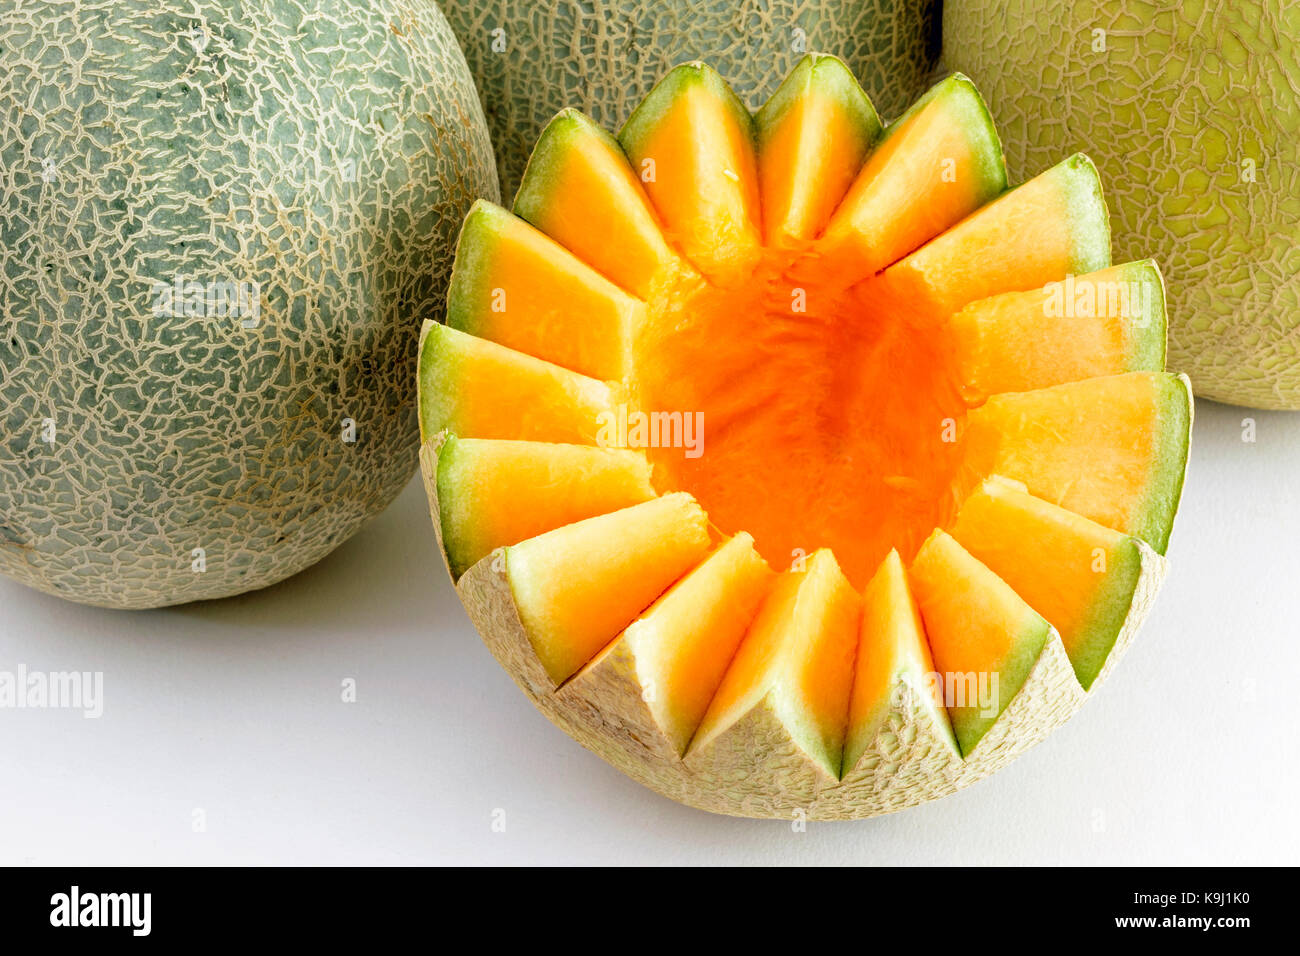 Musk melon - cut and cleaned for sale Stock Photo